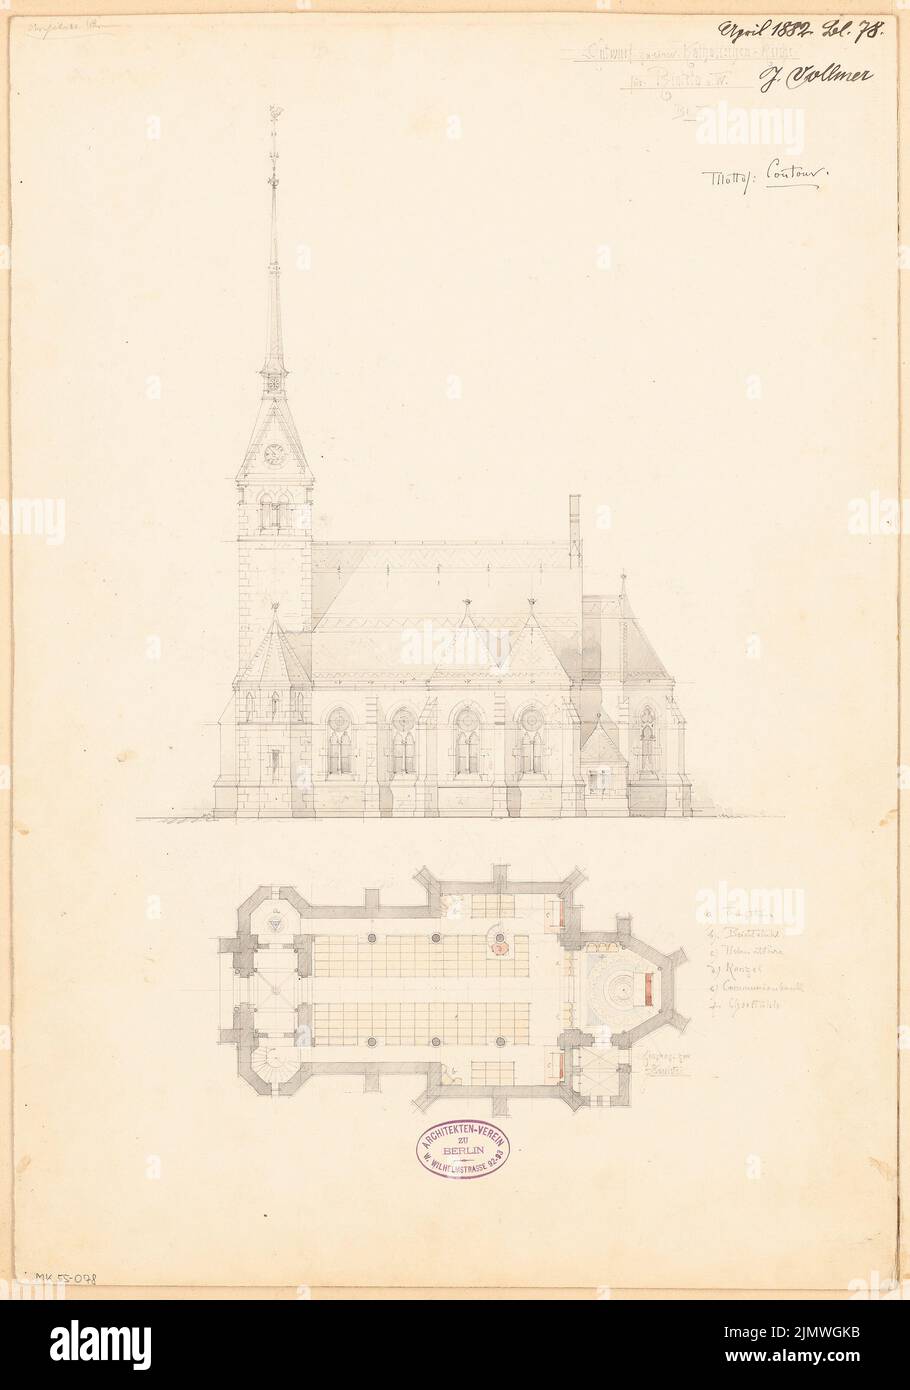 Vollmer Johannes (1845-1920), Catholic Church of St. Sturmius in Rinteln. Monthly competition April 1882 (04.1882): floor plan ground floor, torture south view. Pencil watercolored on paper, 52.8 x 37 cm (including scan edges) Vollmer Johannes  (1845-1920): Katholische Kirche St. Sturmius, Rinteln. Monatskonkurrenz April 1882 Stock Photo